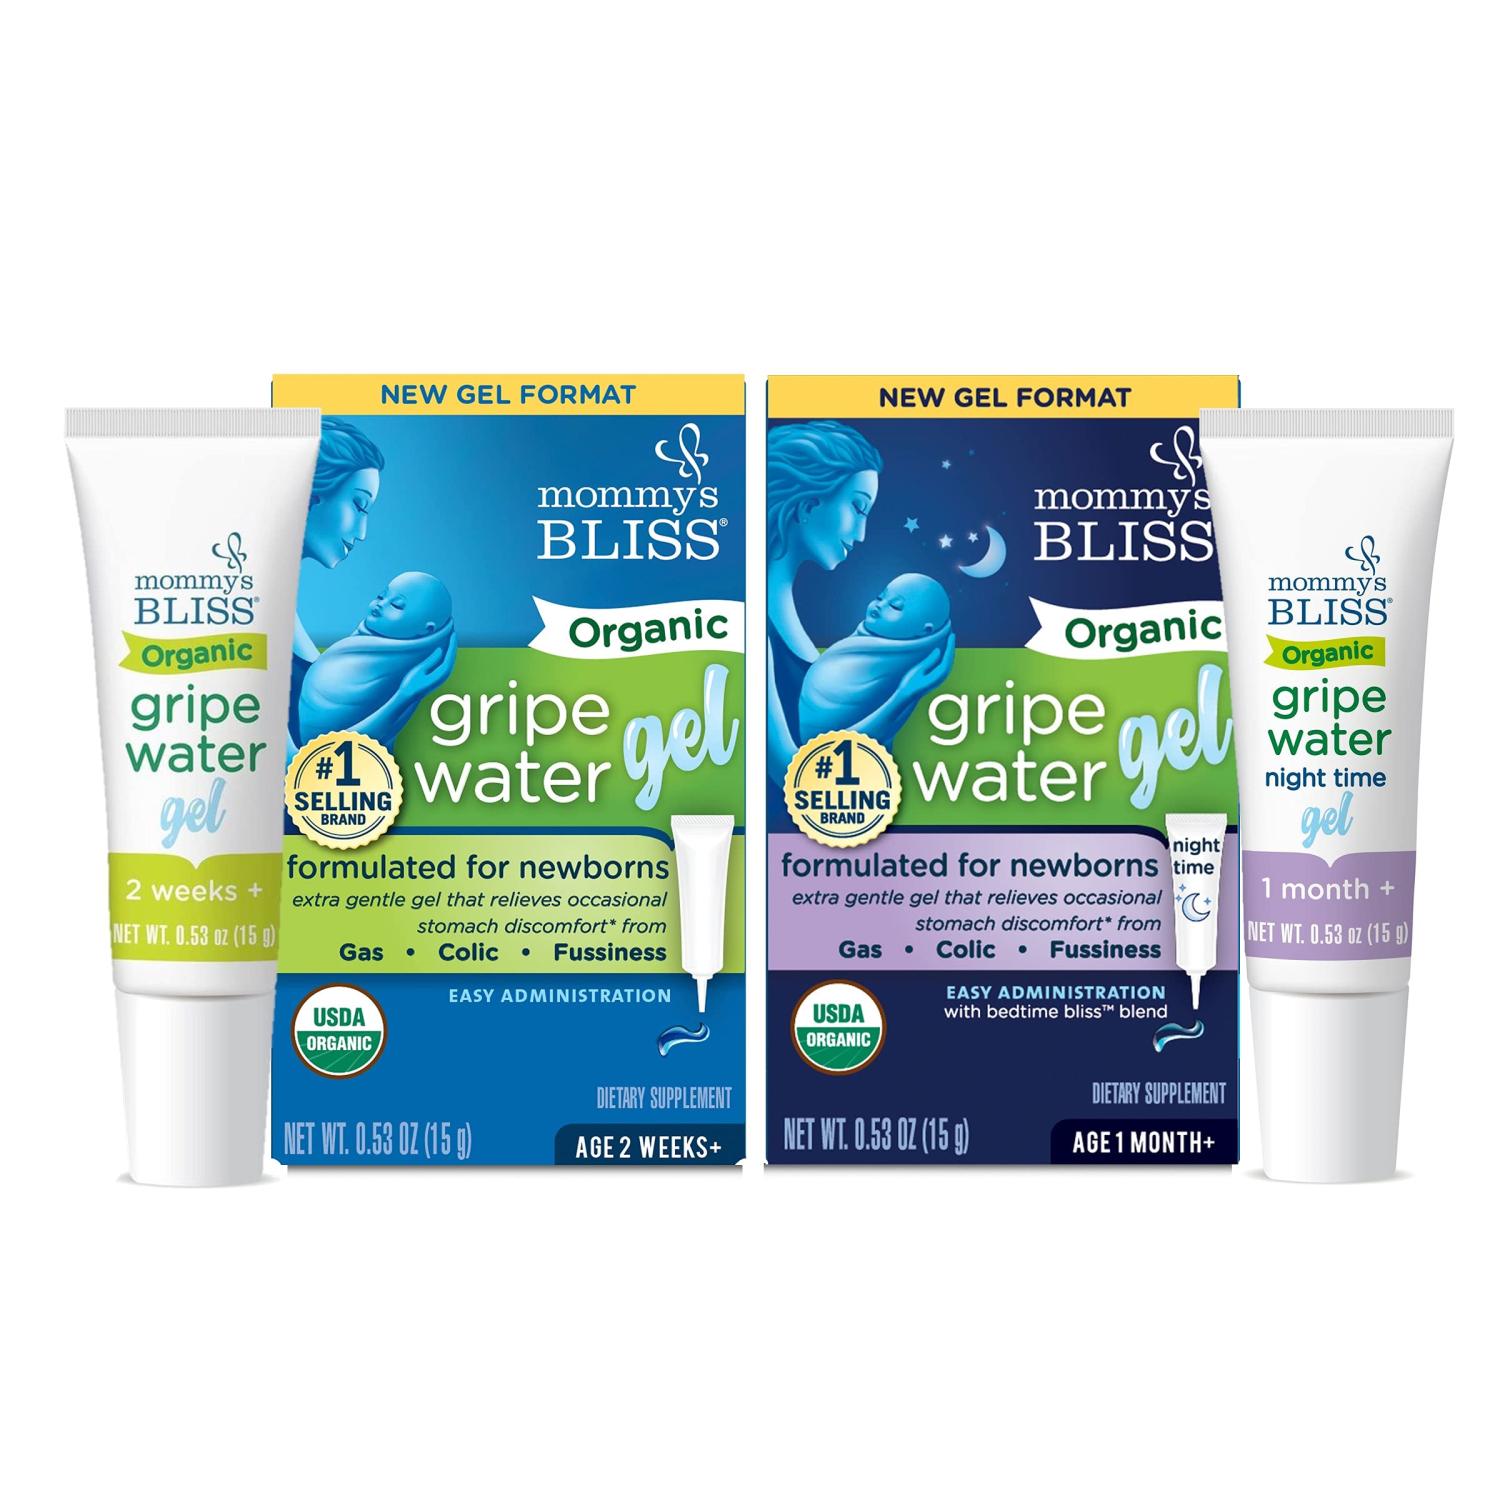 Mommy's Bliss Organic Gripe Water Original Gel (Pack of 1), with